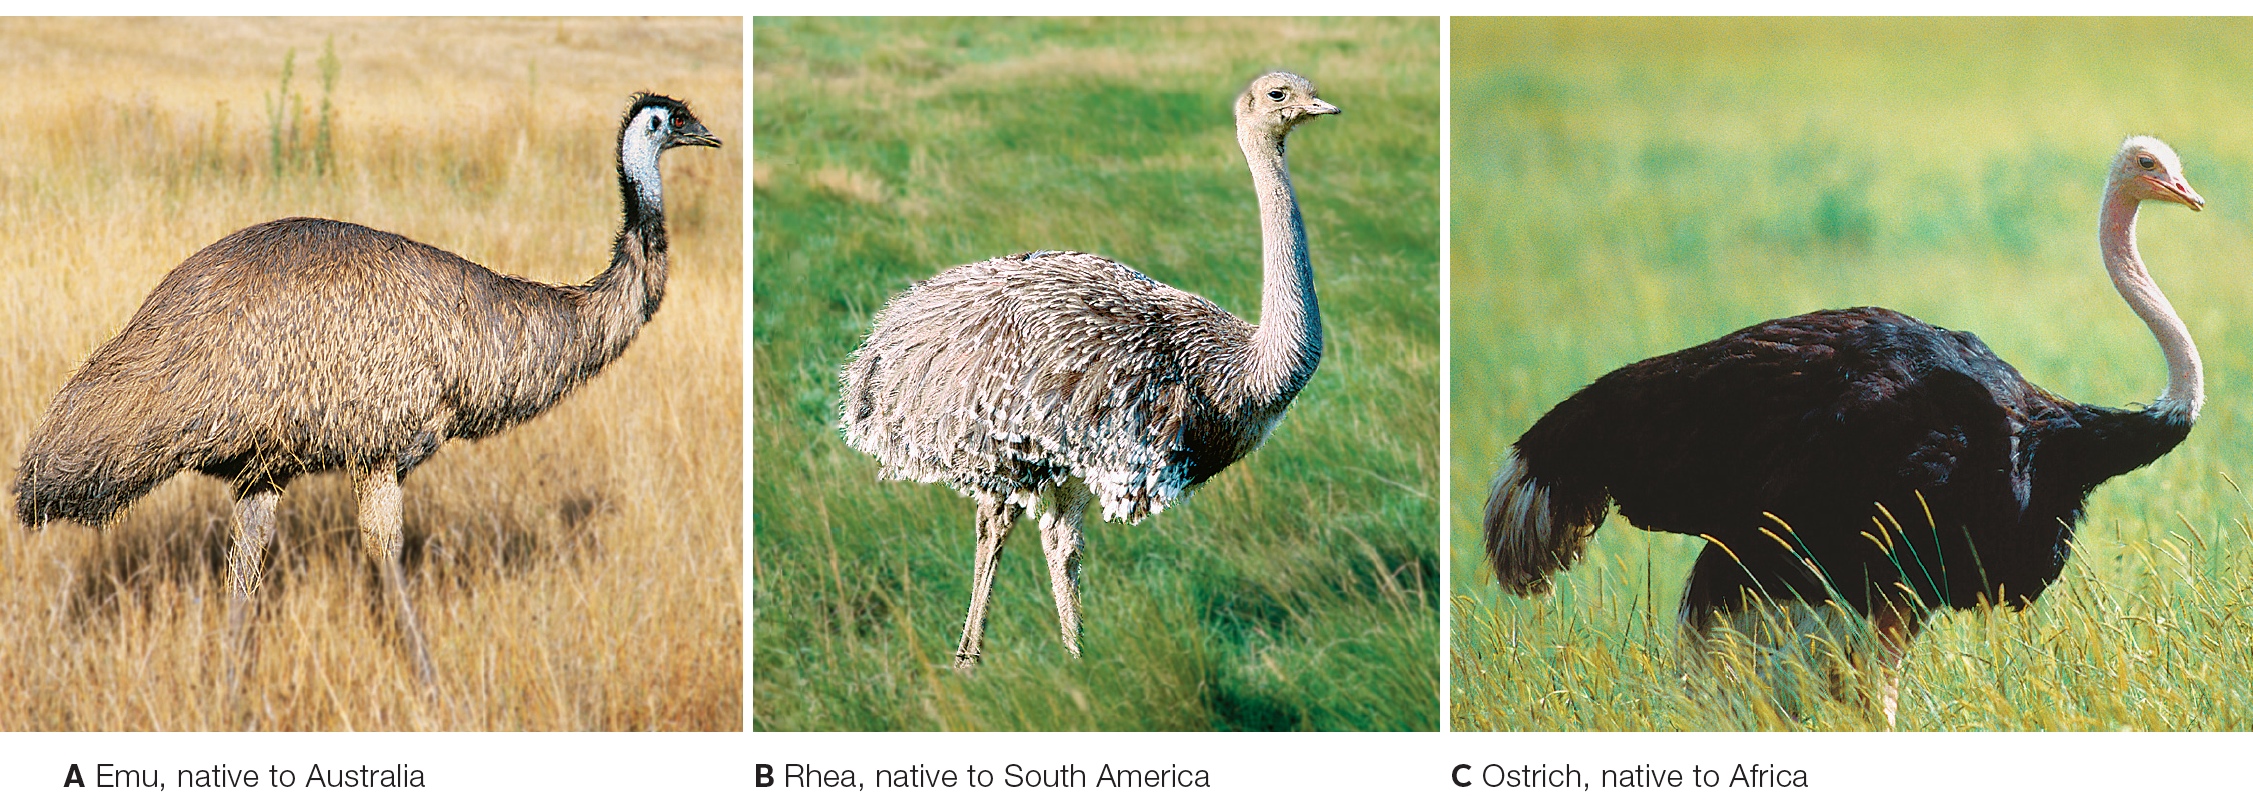 Similar-looking, related species that are native to distant geographic realms